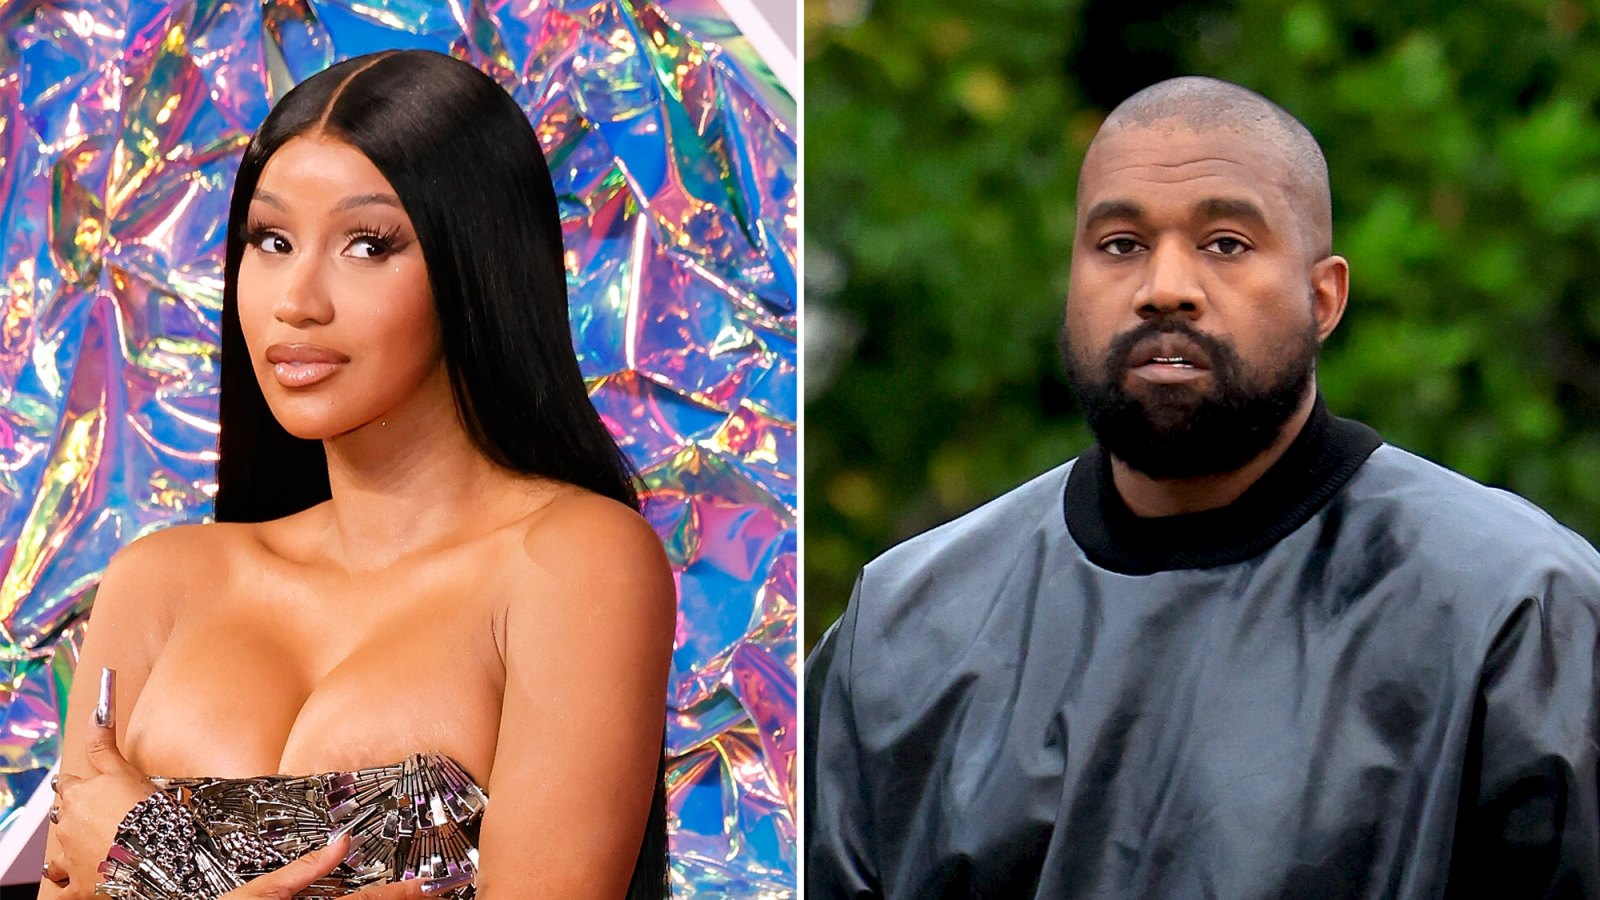 Cardi B Took The High Road After Seeing Kanye West Dissed Her